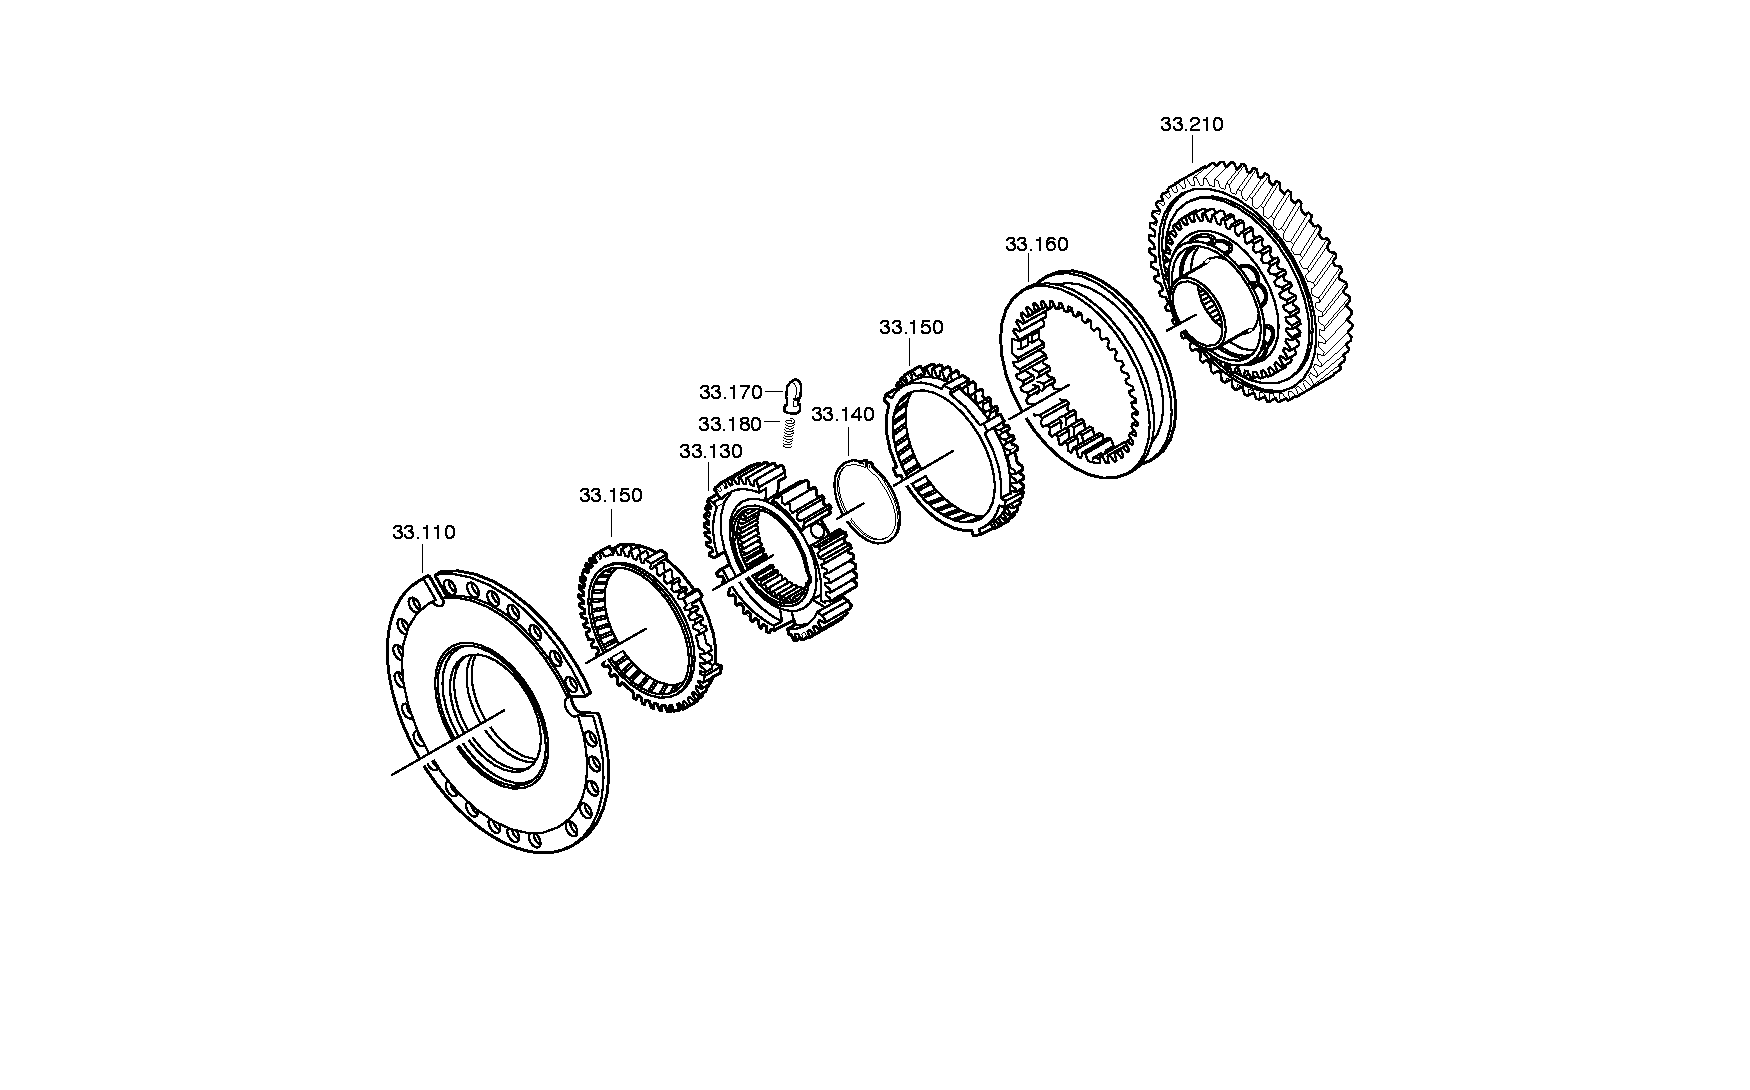 drawing for DAF 699727 - CLUTCH BODY (figure 2)